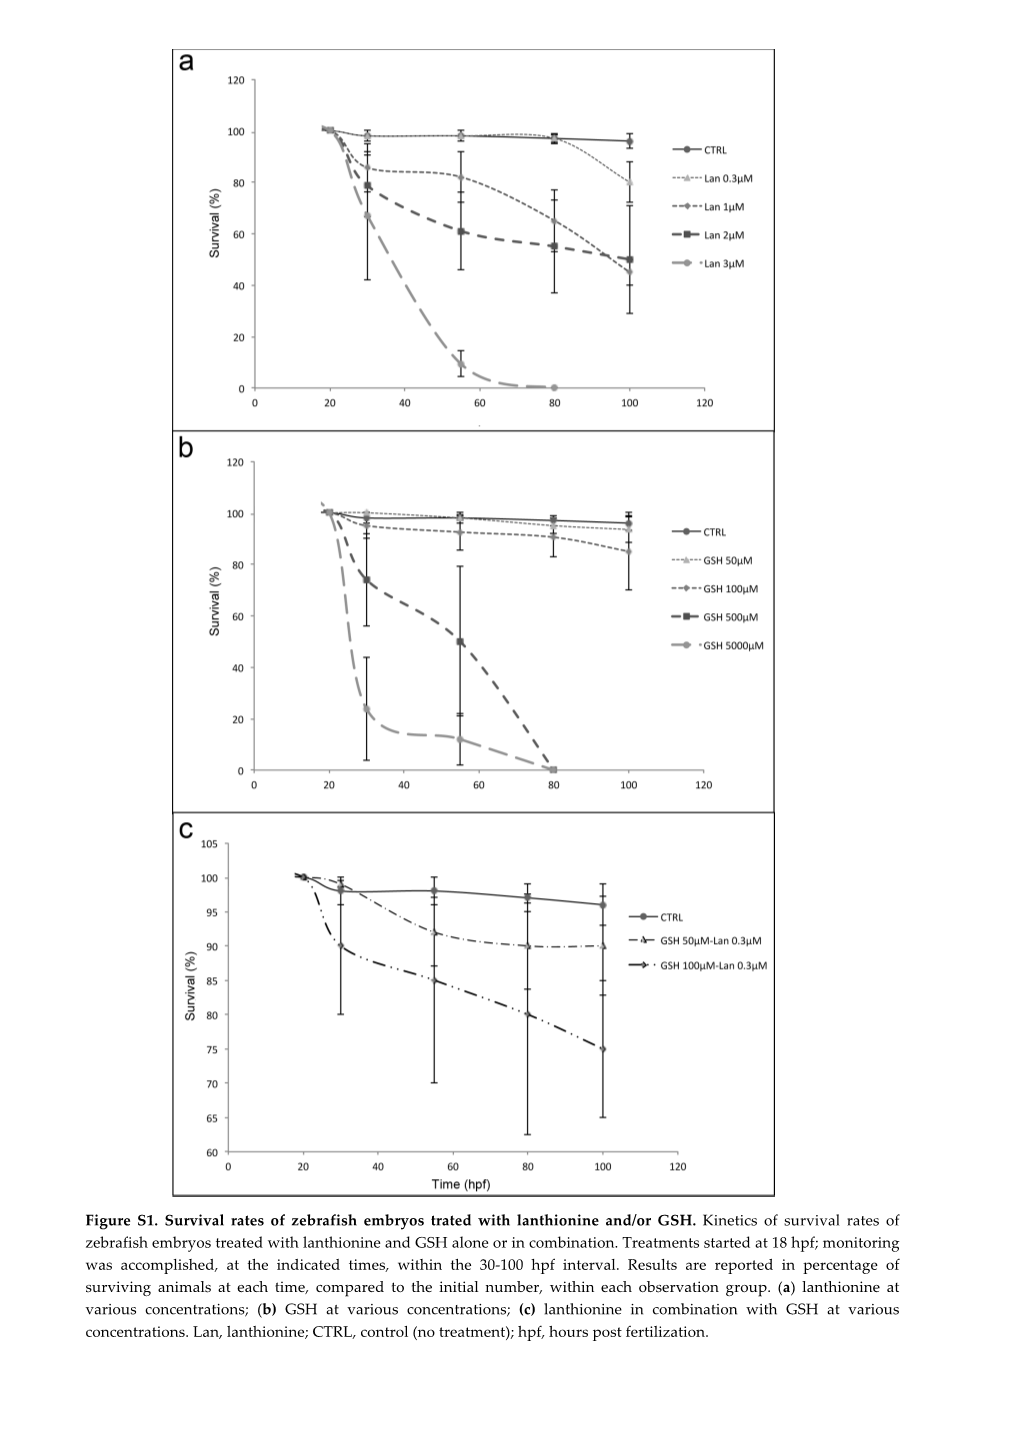 Figure S1. Survival Rates of Zebrafish Embryos Trated with Lanthionine And/Or GSH